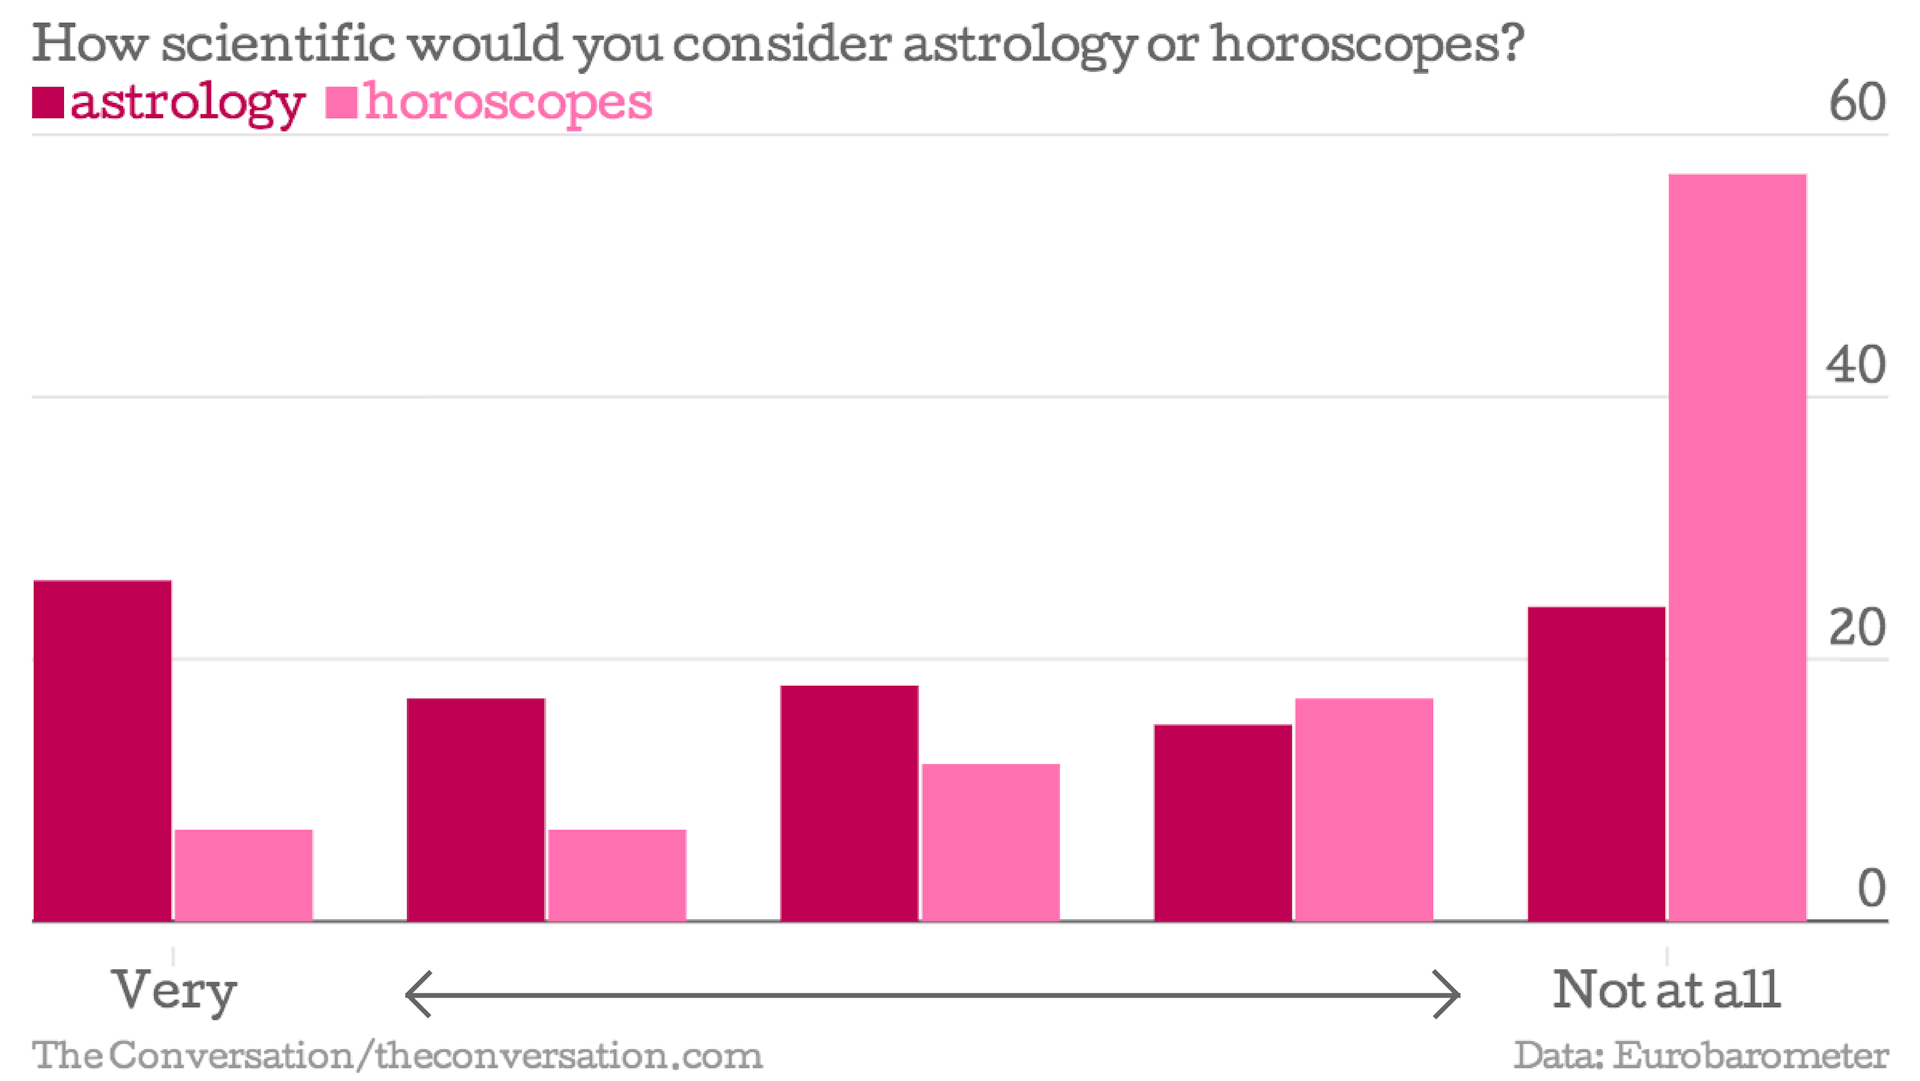 astrology is not real